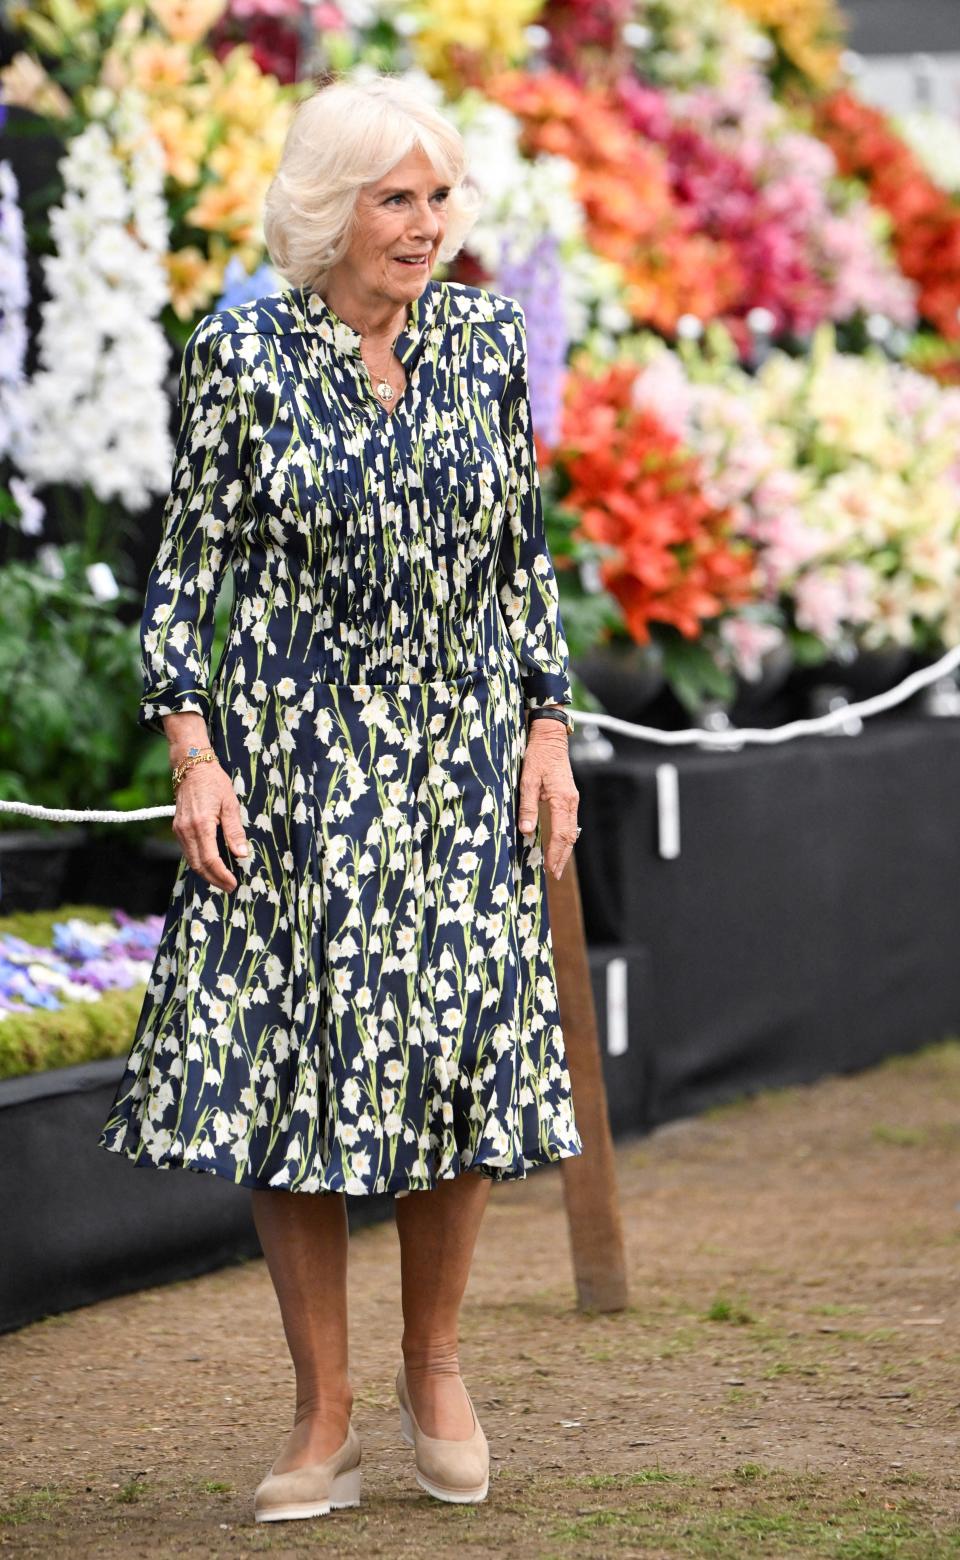 Britain's Queen Camilla at the Chelsea Flower Show.